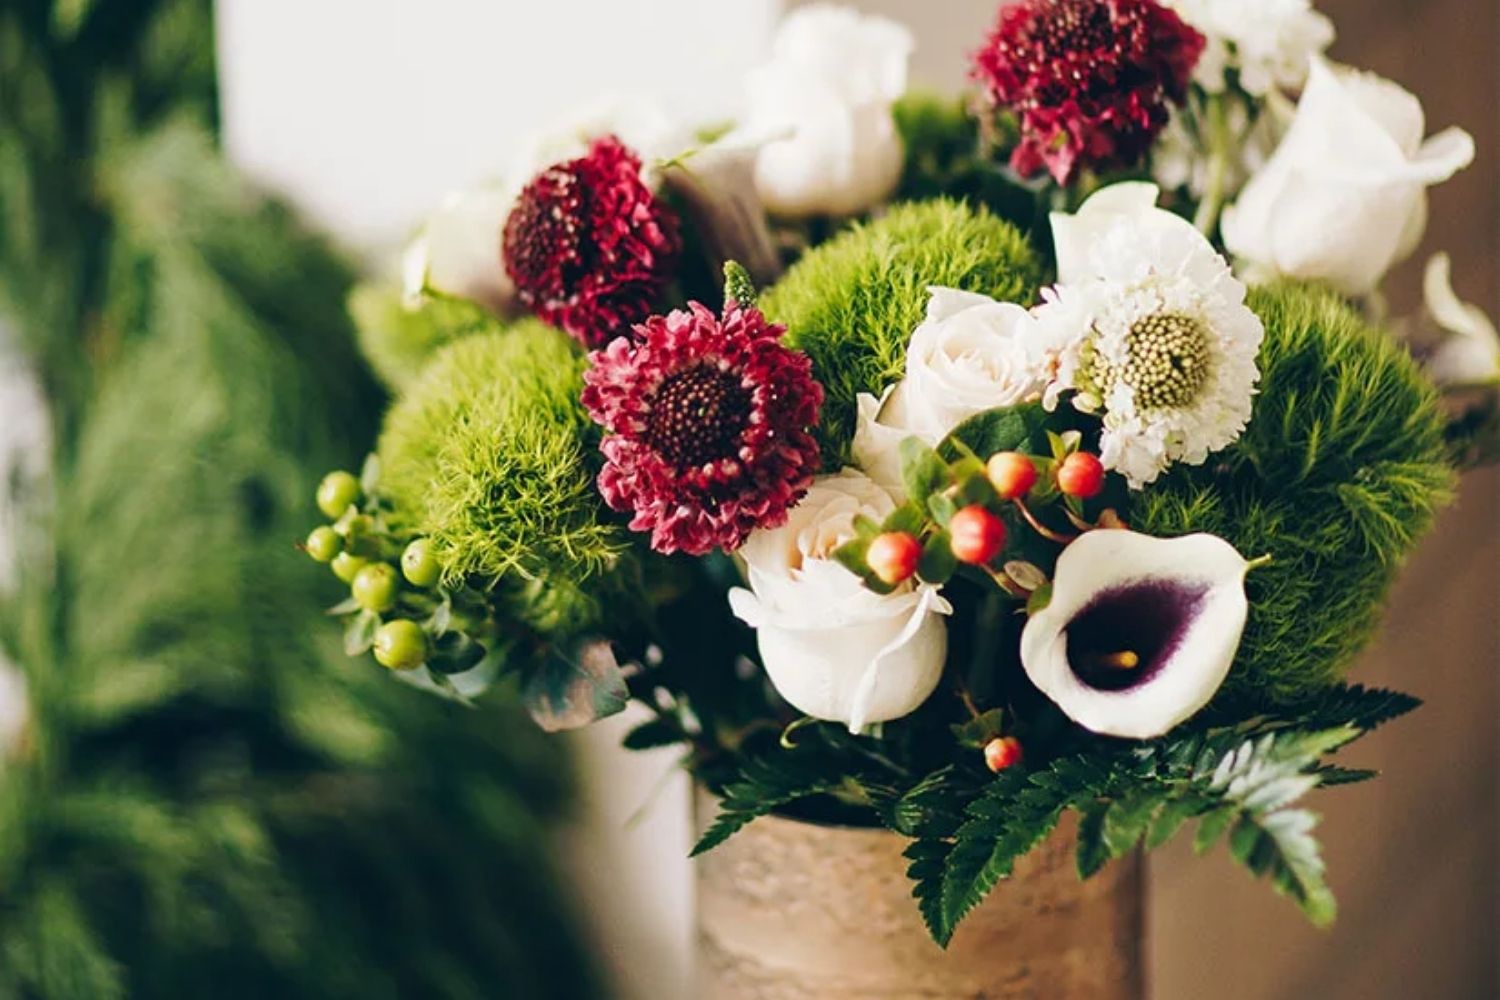 The Best Plant Delivery Service Option: UrbanStems